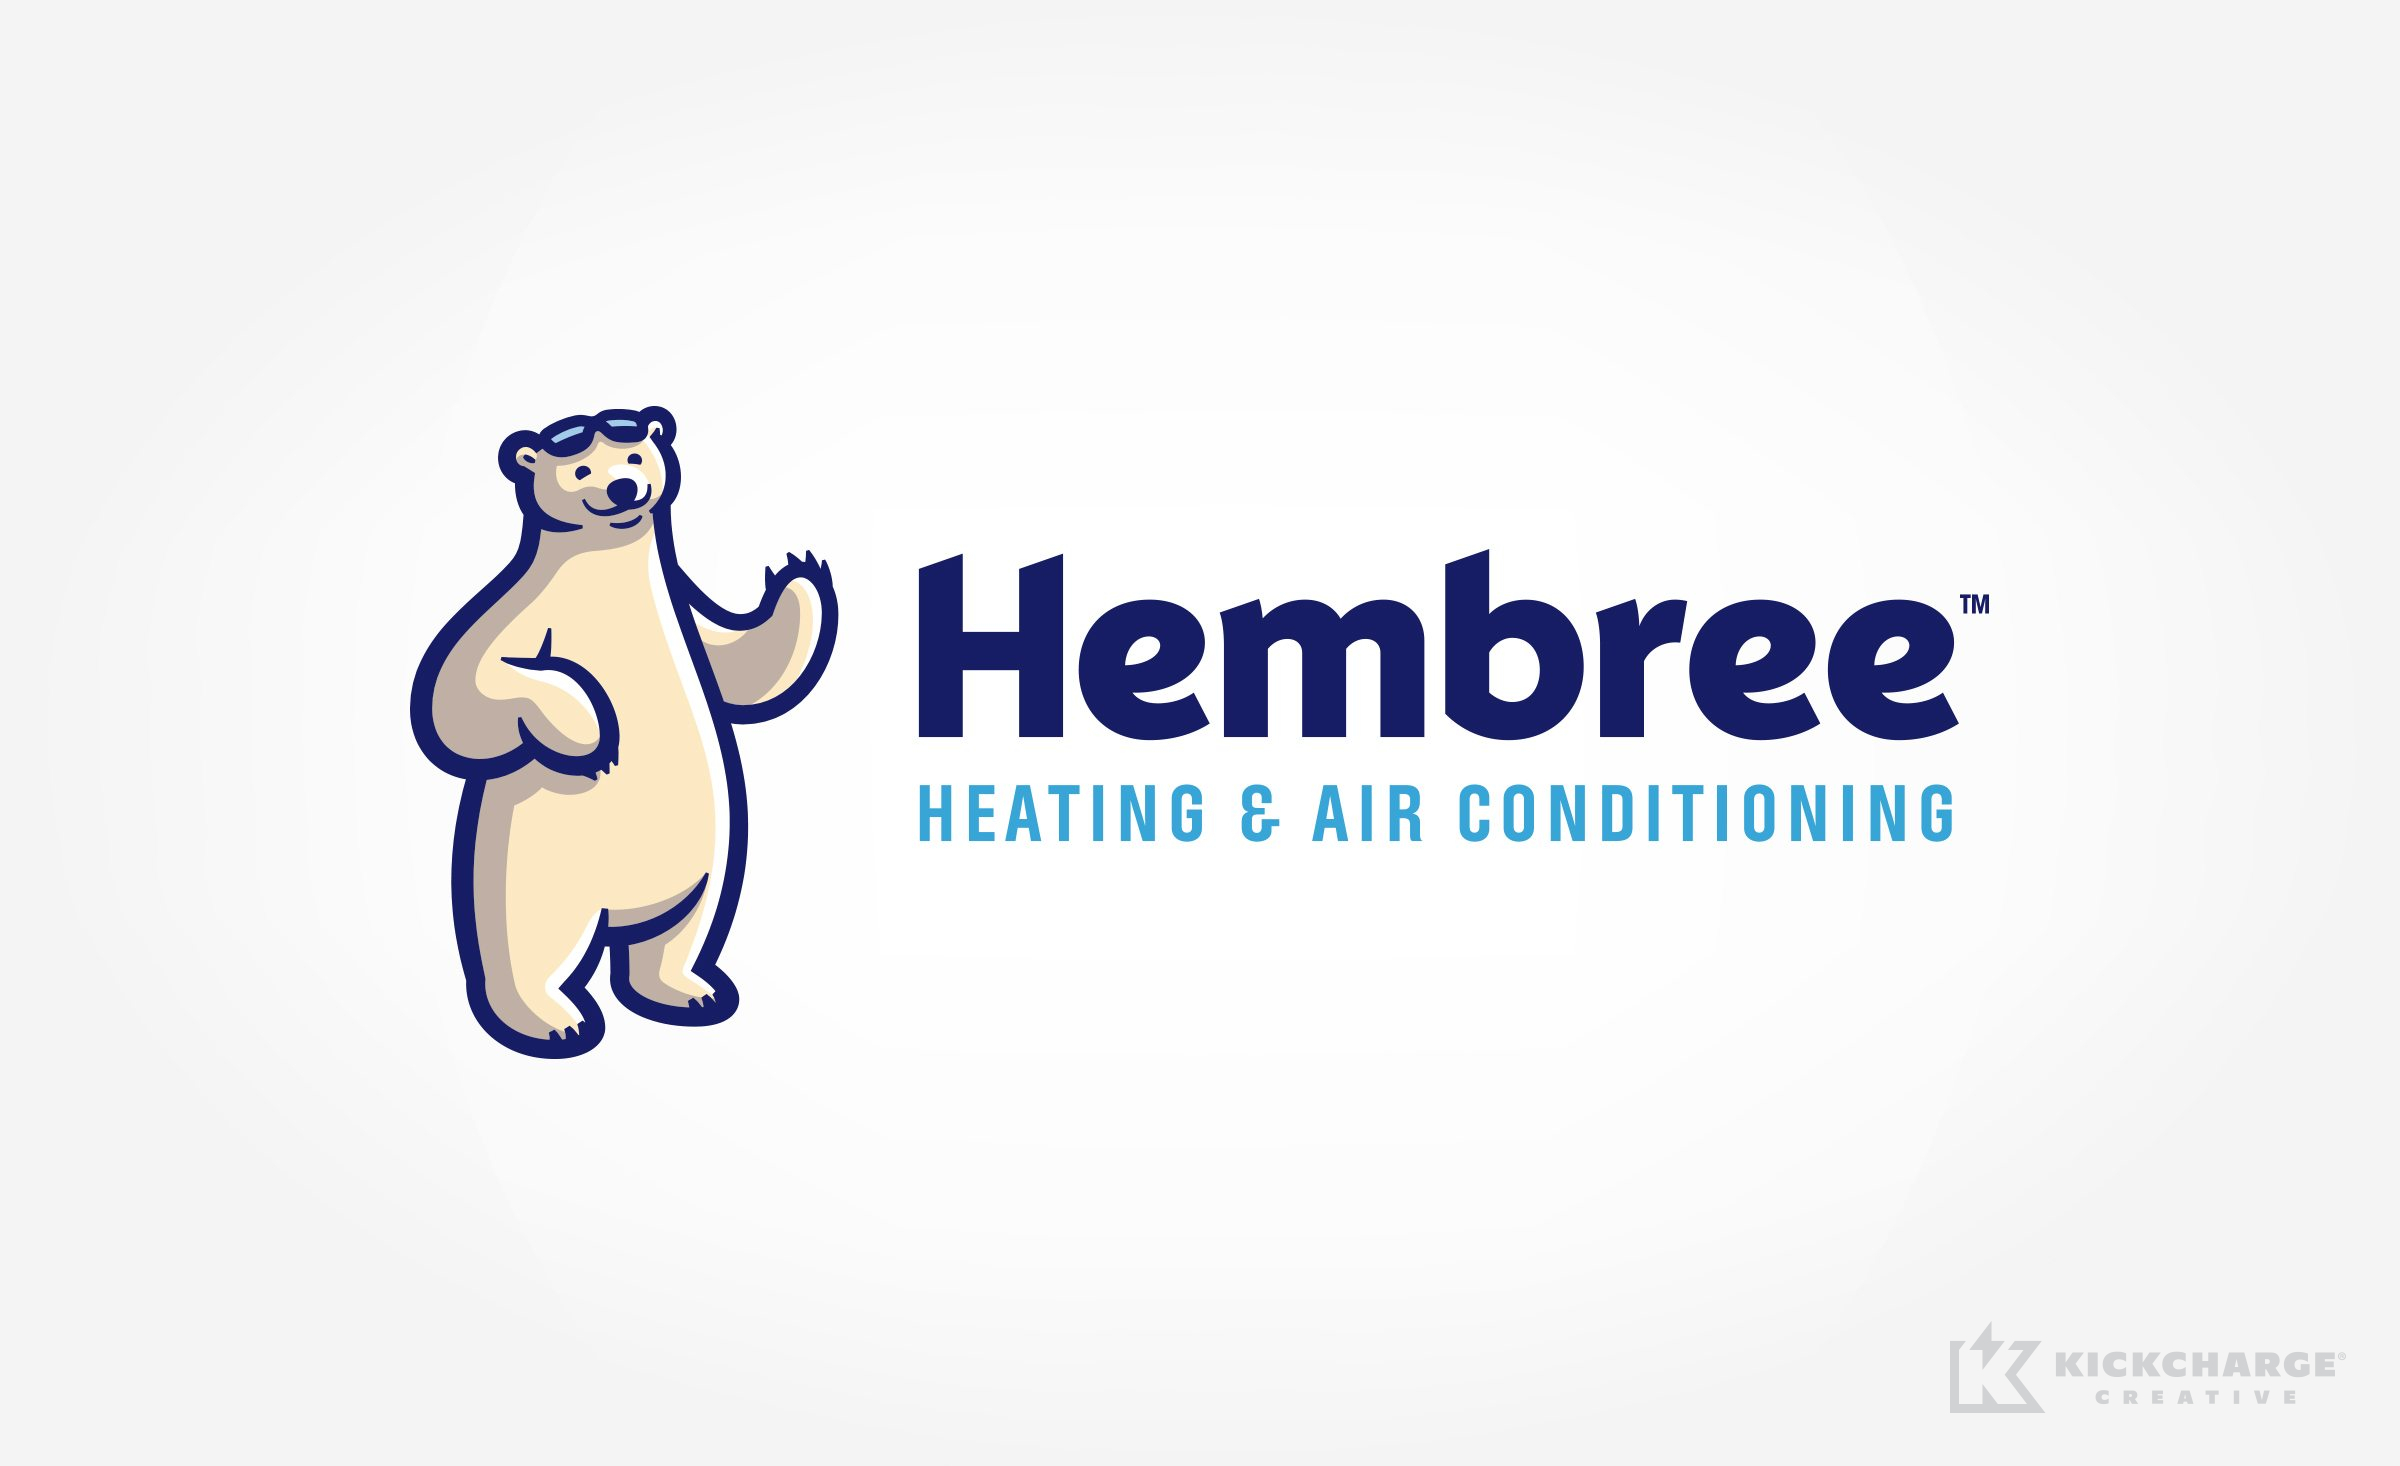 hvac logo for Hembree Heating & Air Conditioning